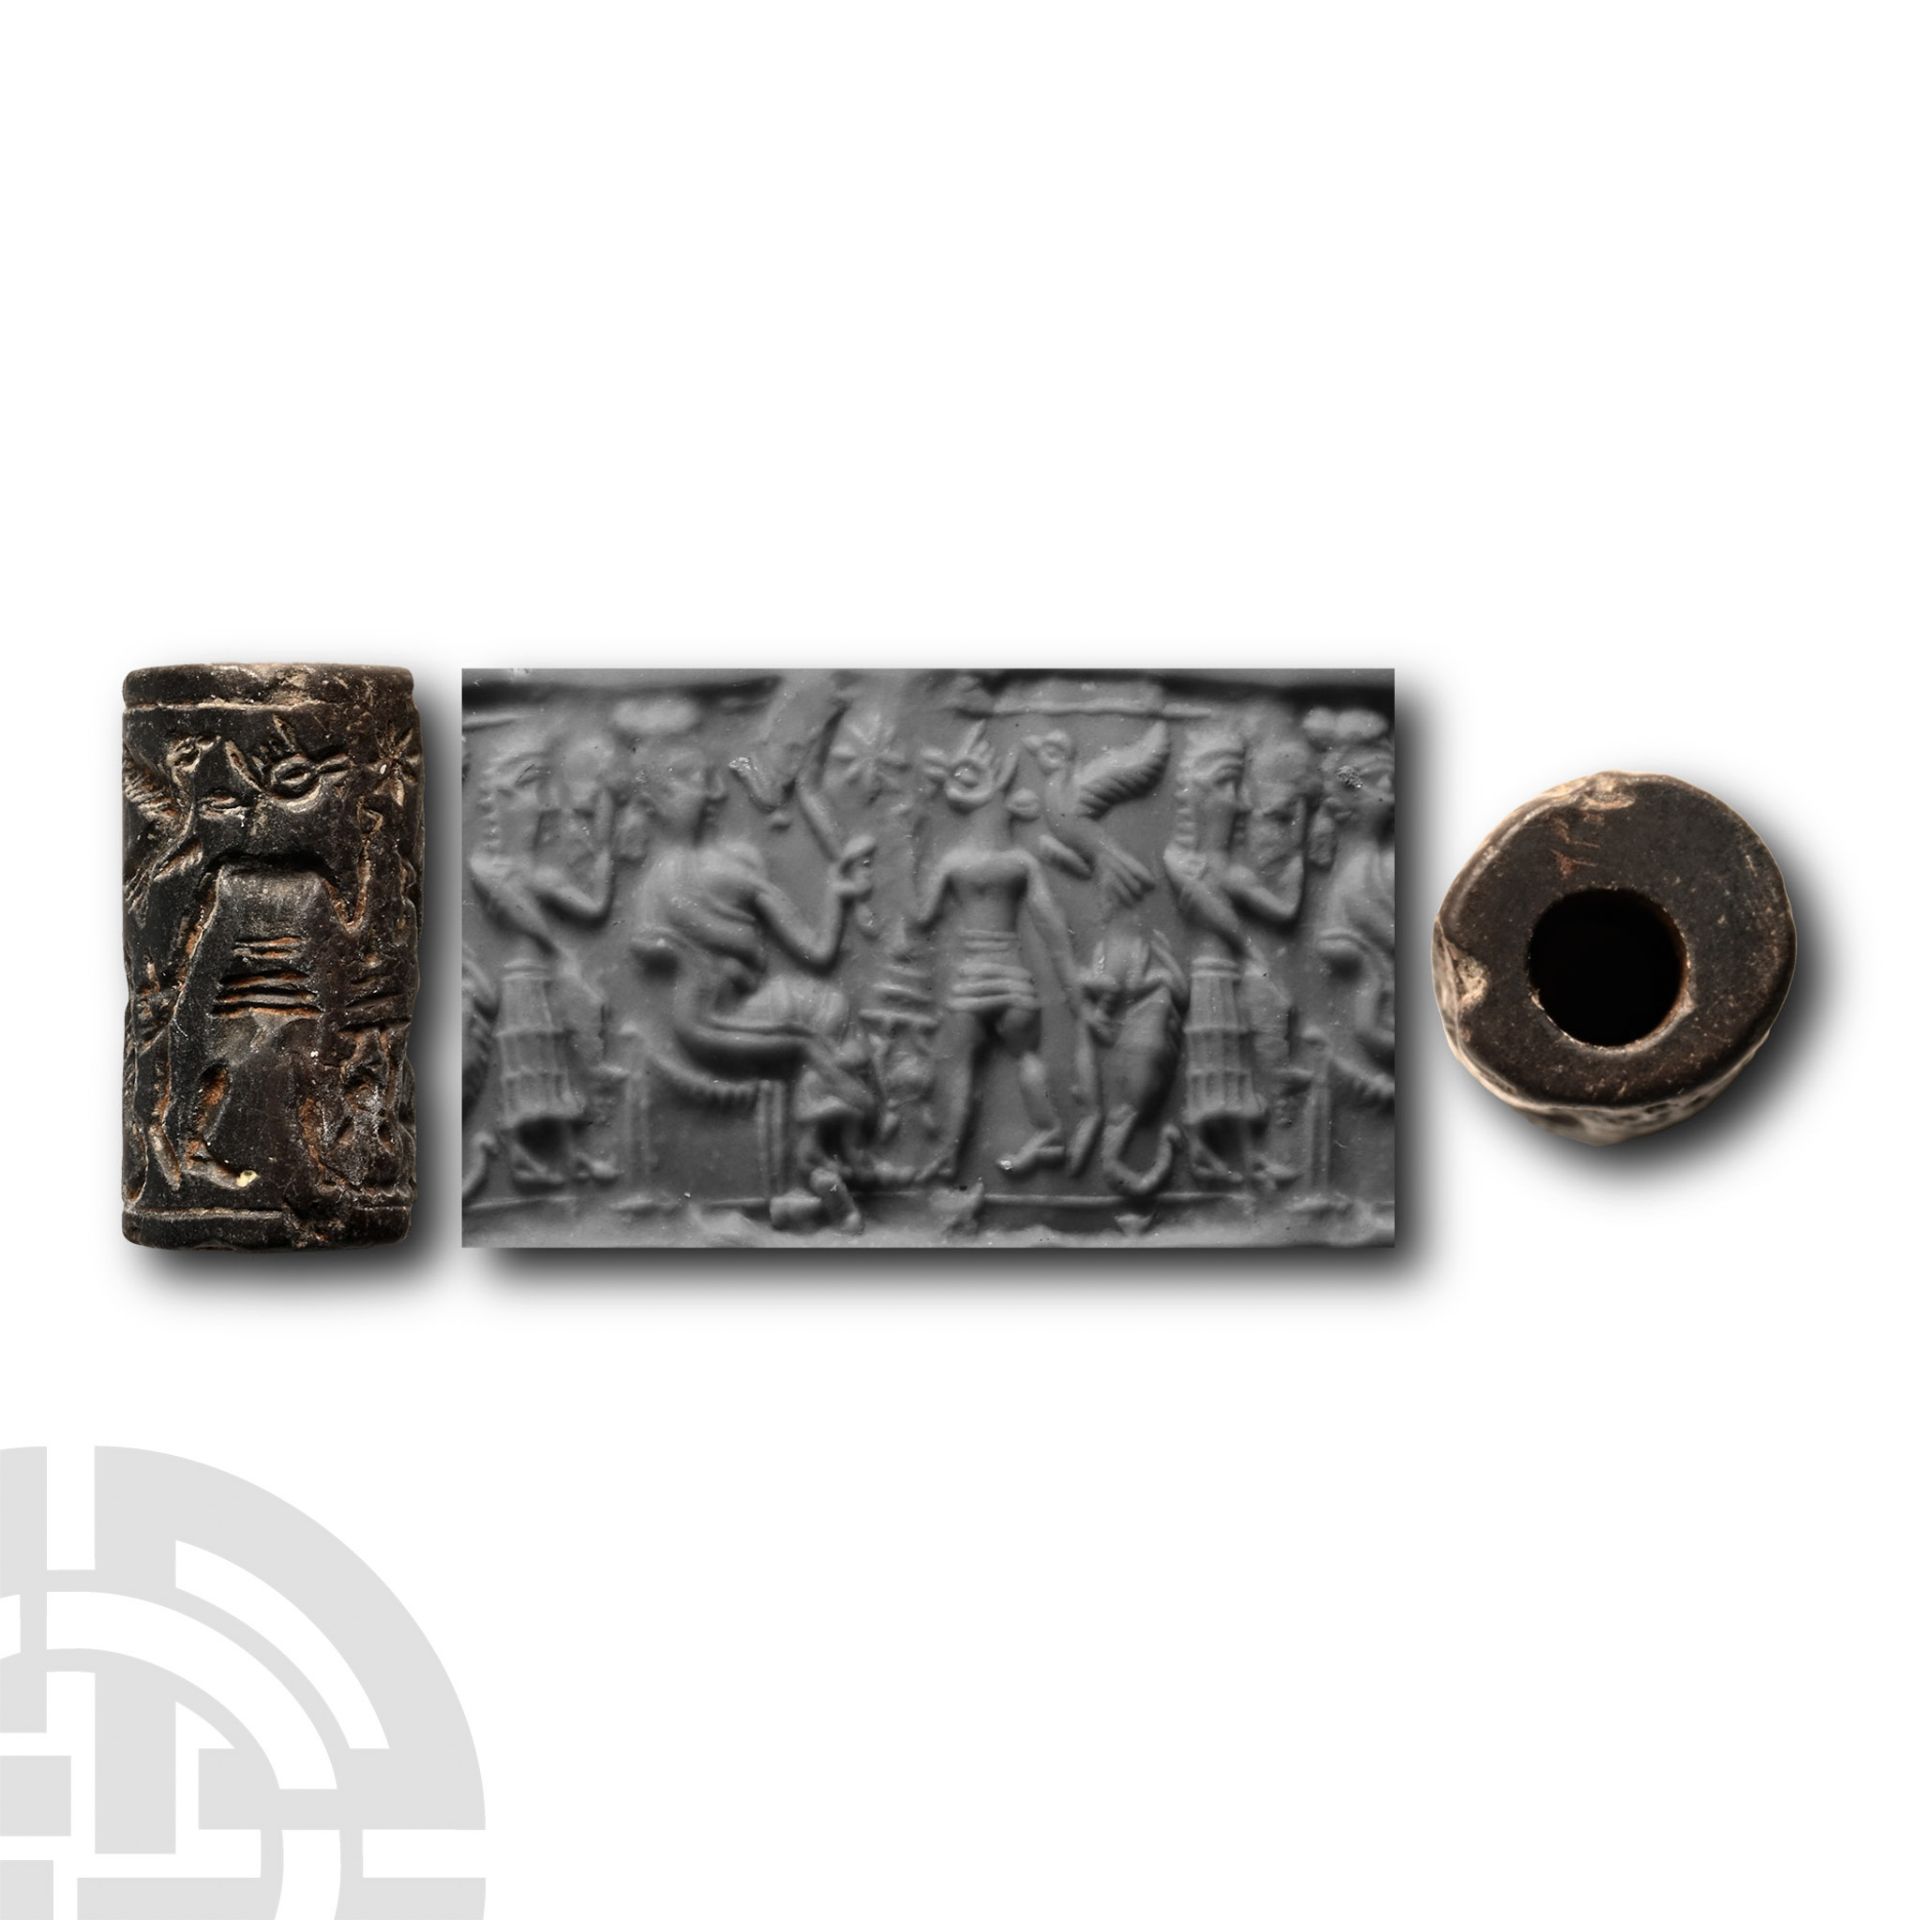 Western Asiatic Stone Cylinder Seal with Worship Scene